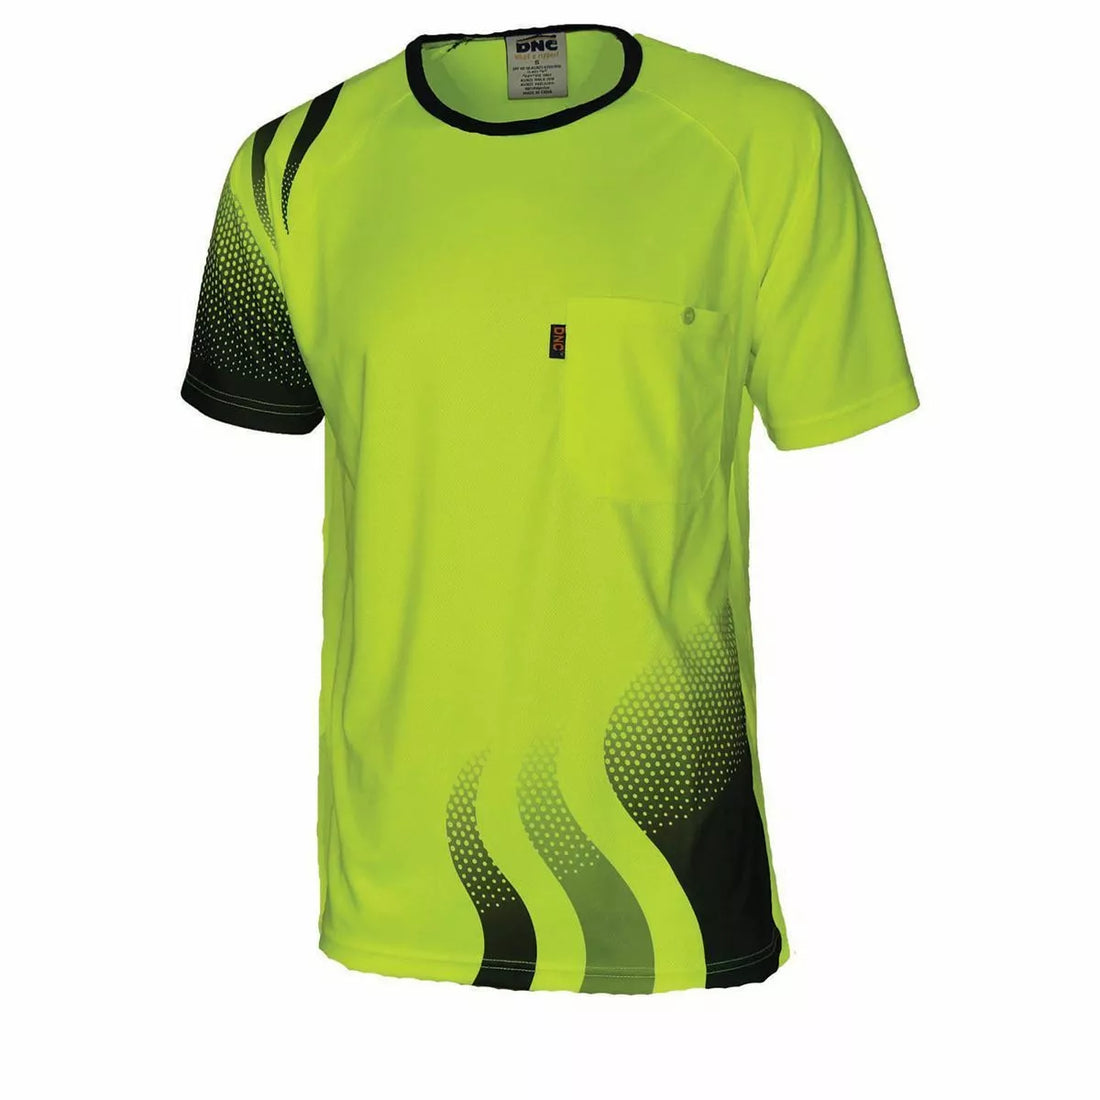 Wave Sublimated Polyester Tee Short Sleeve - Different colors